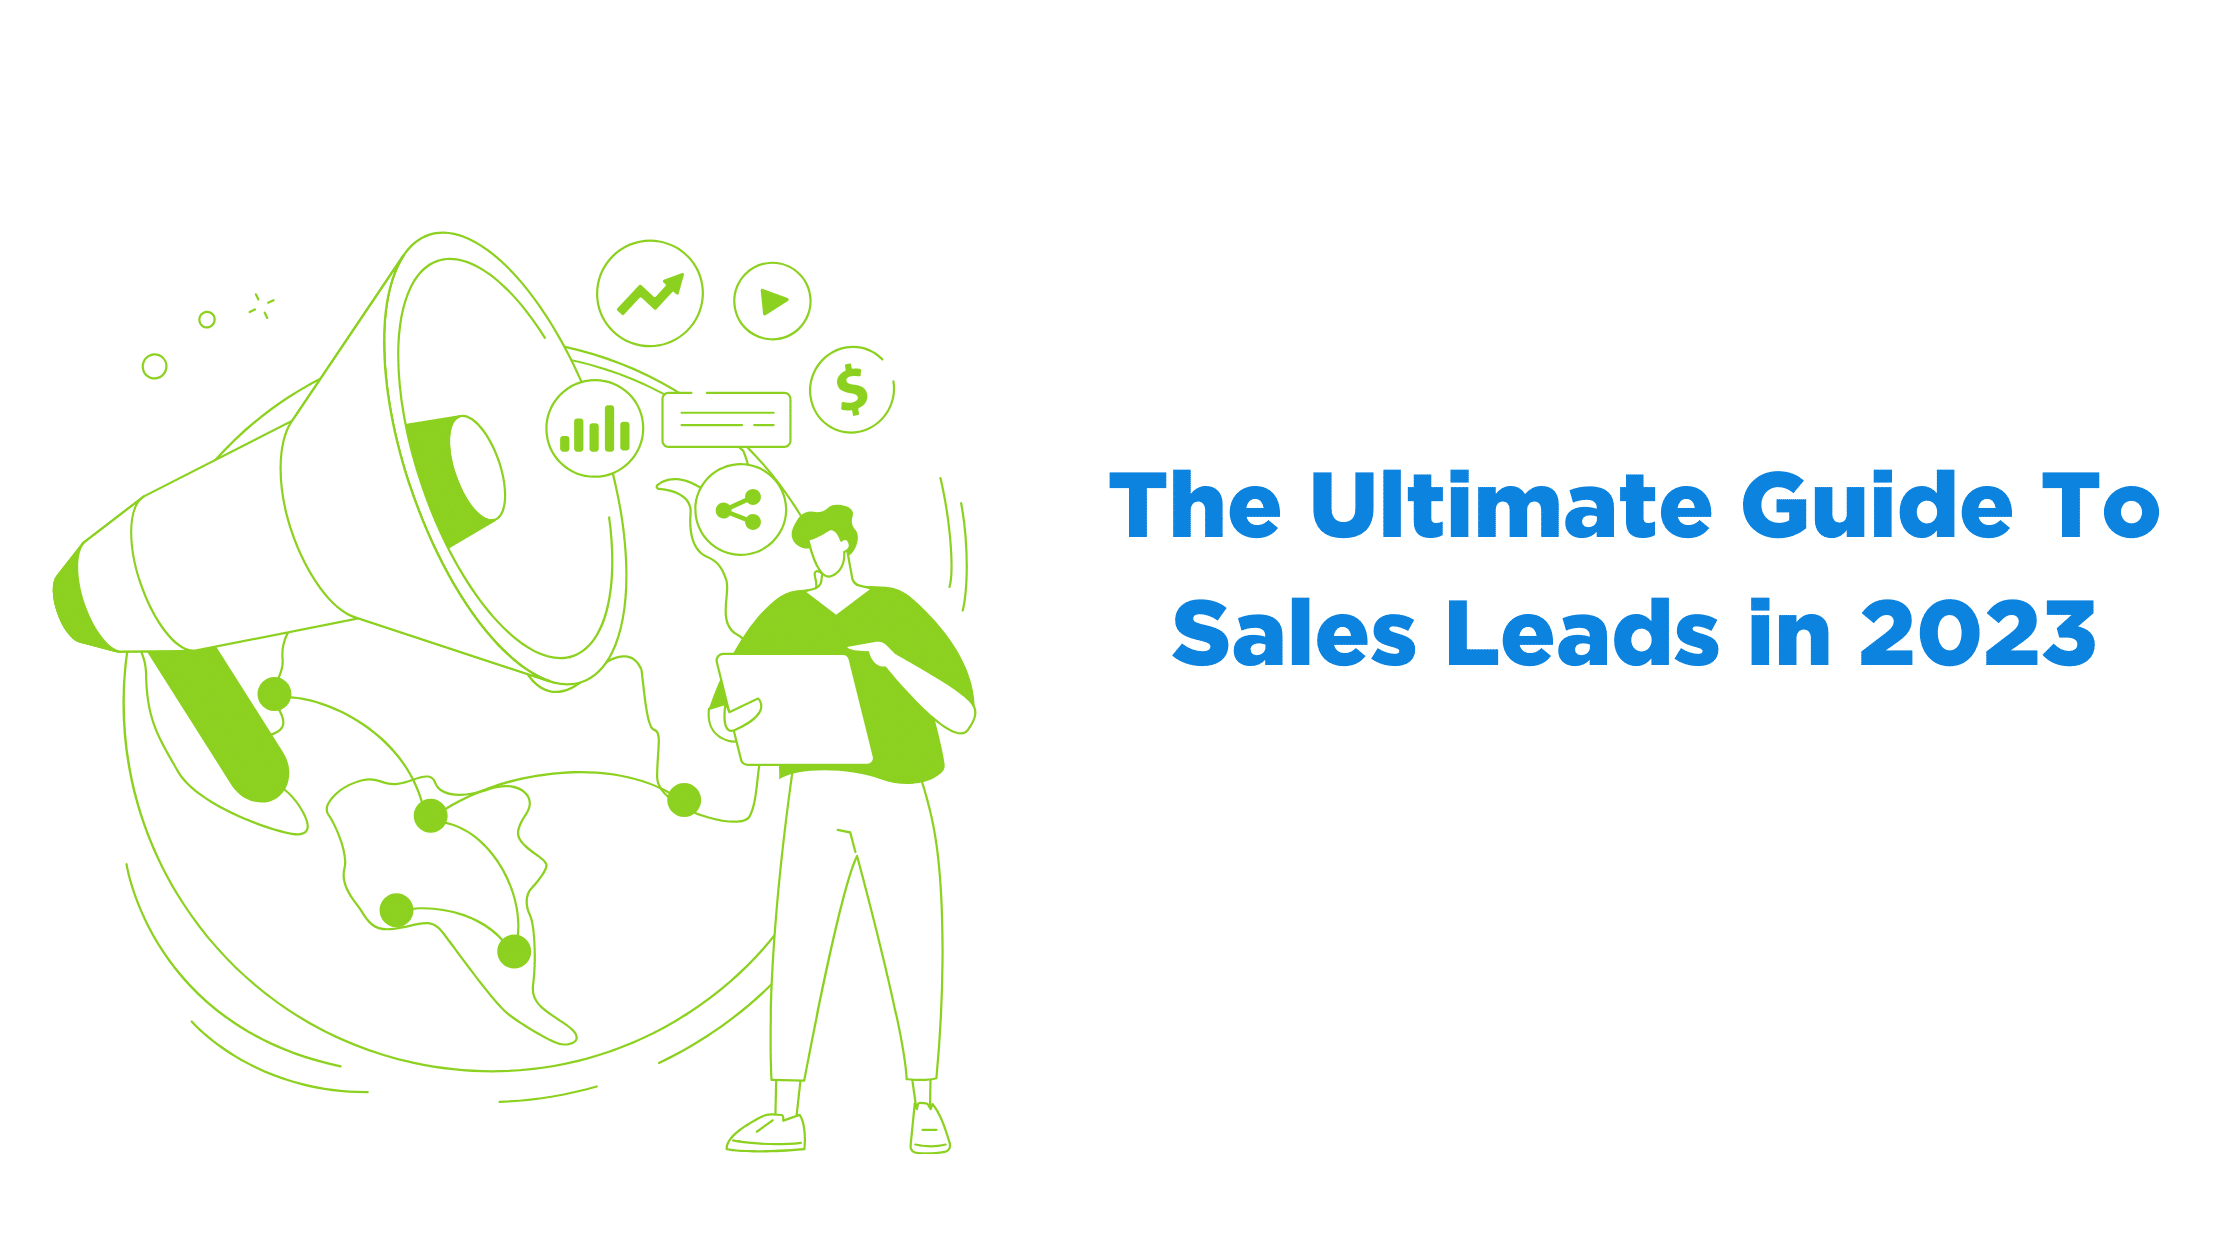 The Ultimate Guide To Sales Leads in 2023